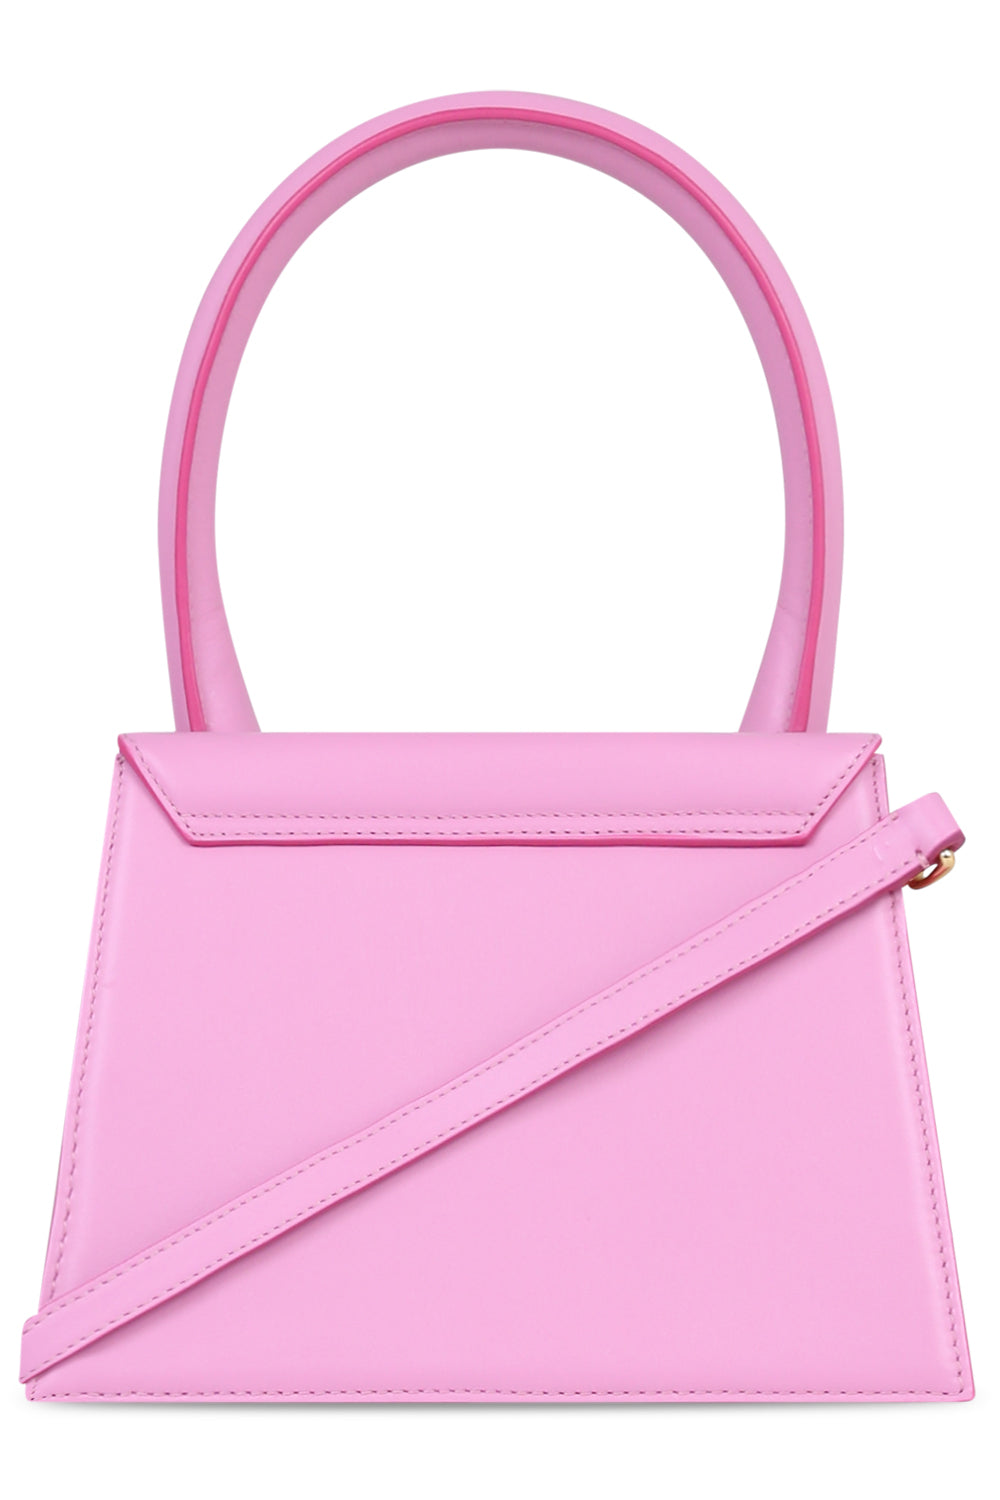 JACQUEMUS BAGS PINK LE GRAND CHIQUITO LIGHT PINK